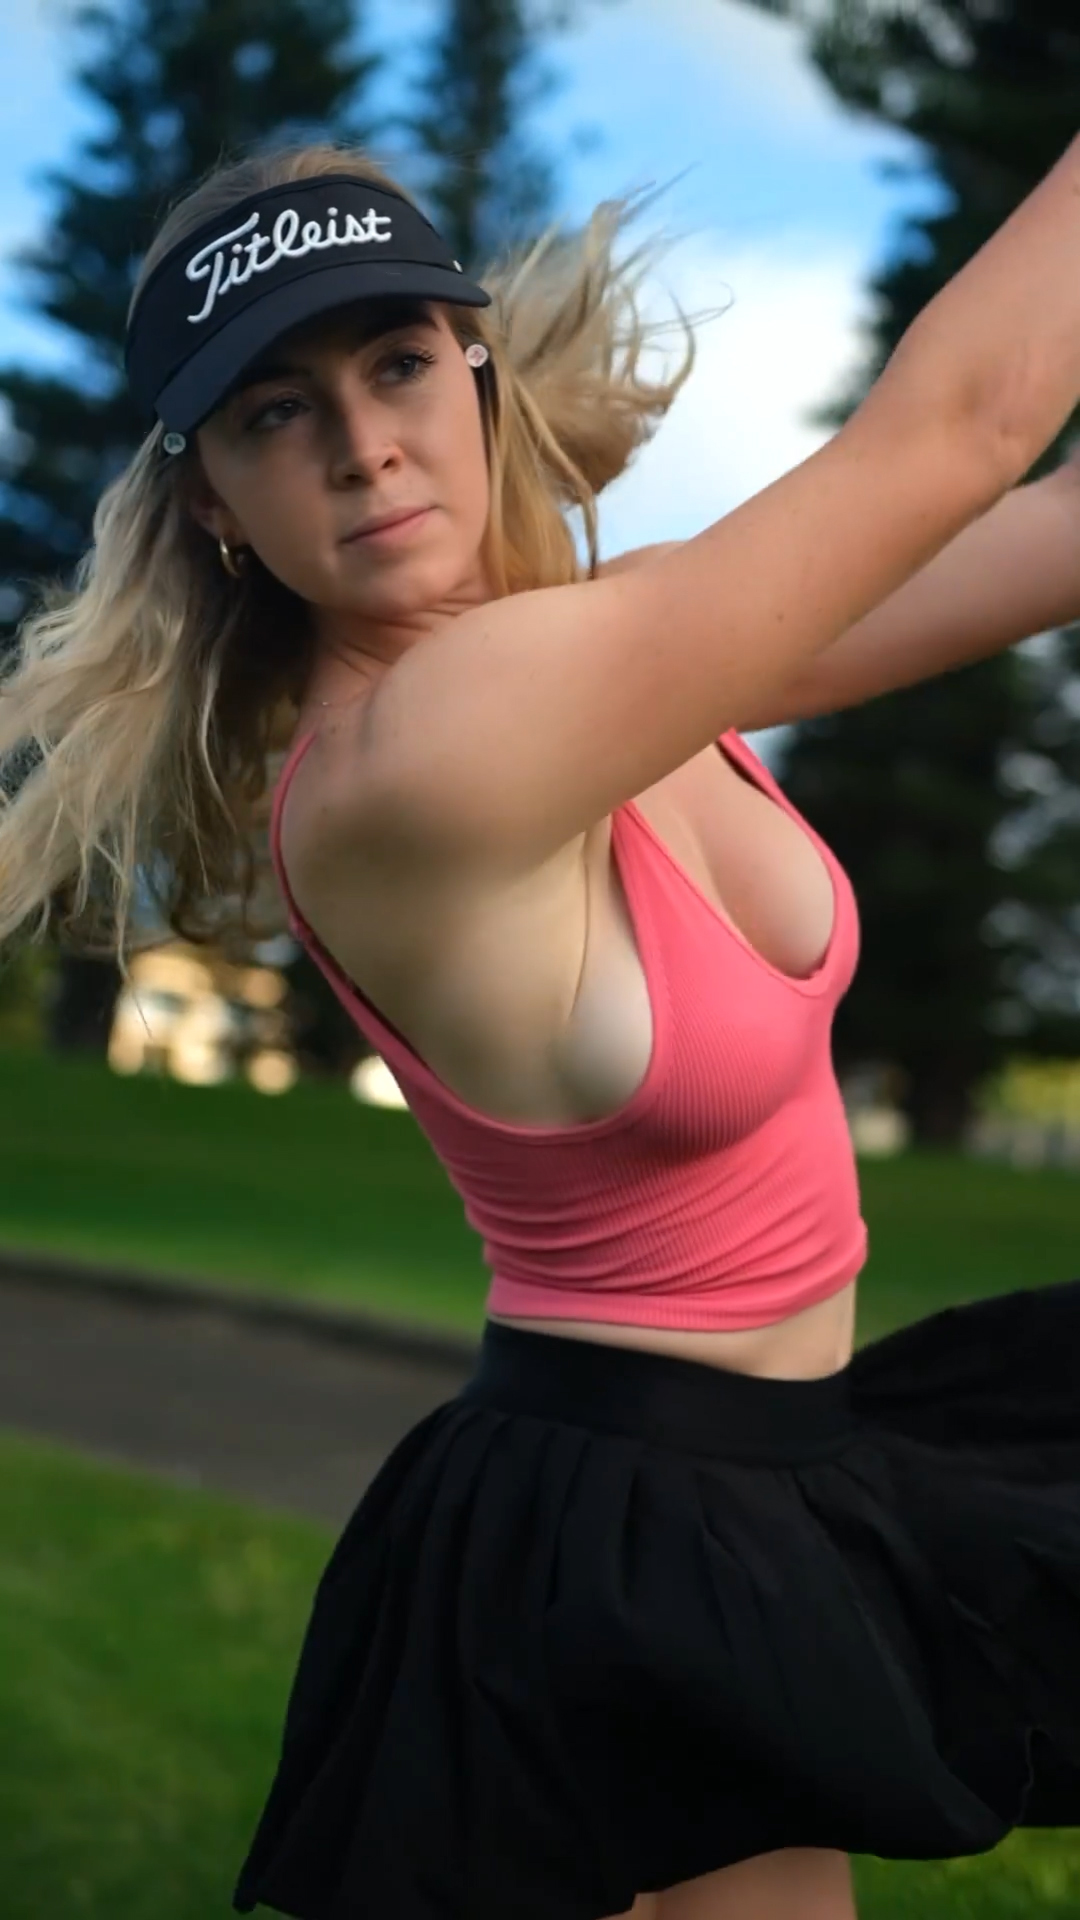 She shared two videos of her hitting golf balls in slow motion on Instagram